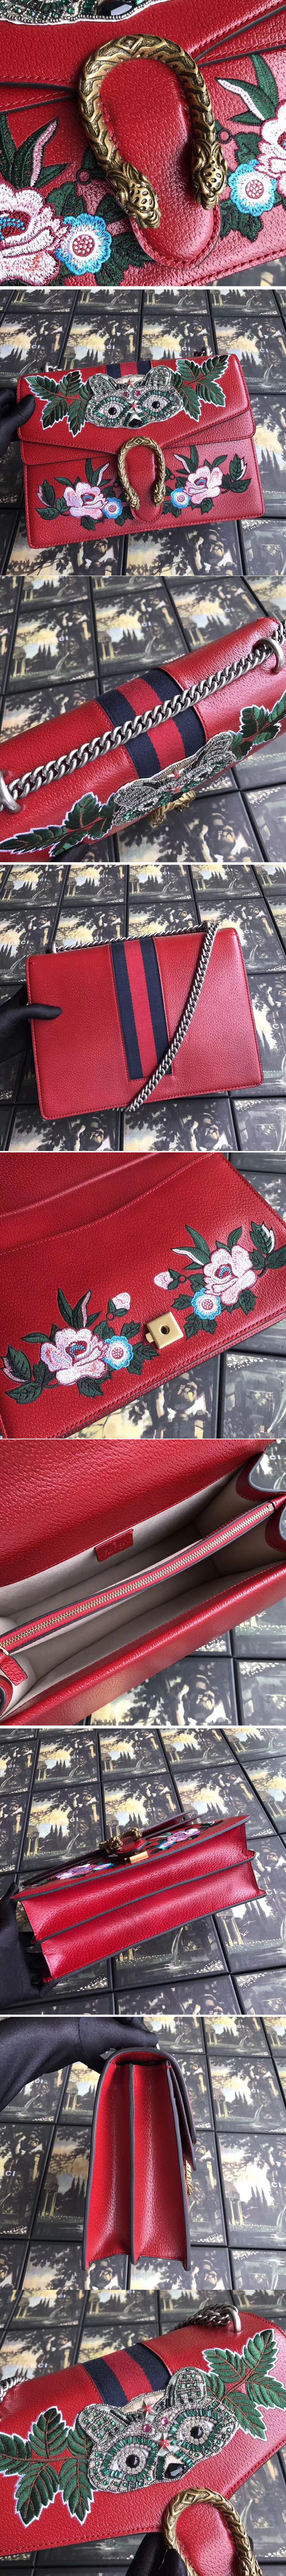 Replica Gucci 400235 Dionysus Embroidered Owl Shoulder Bag Red